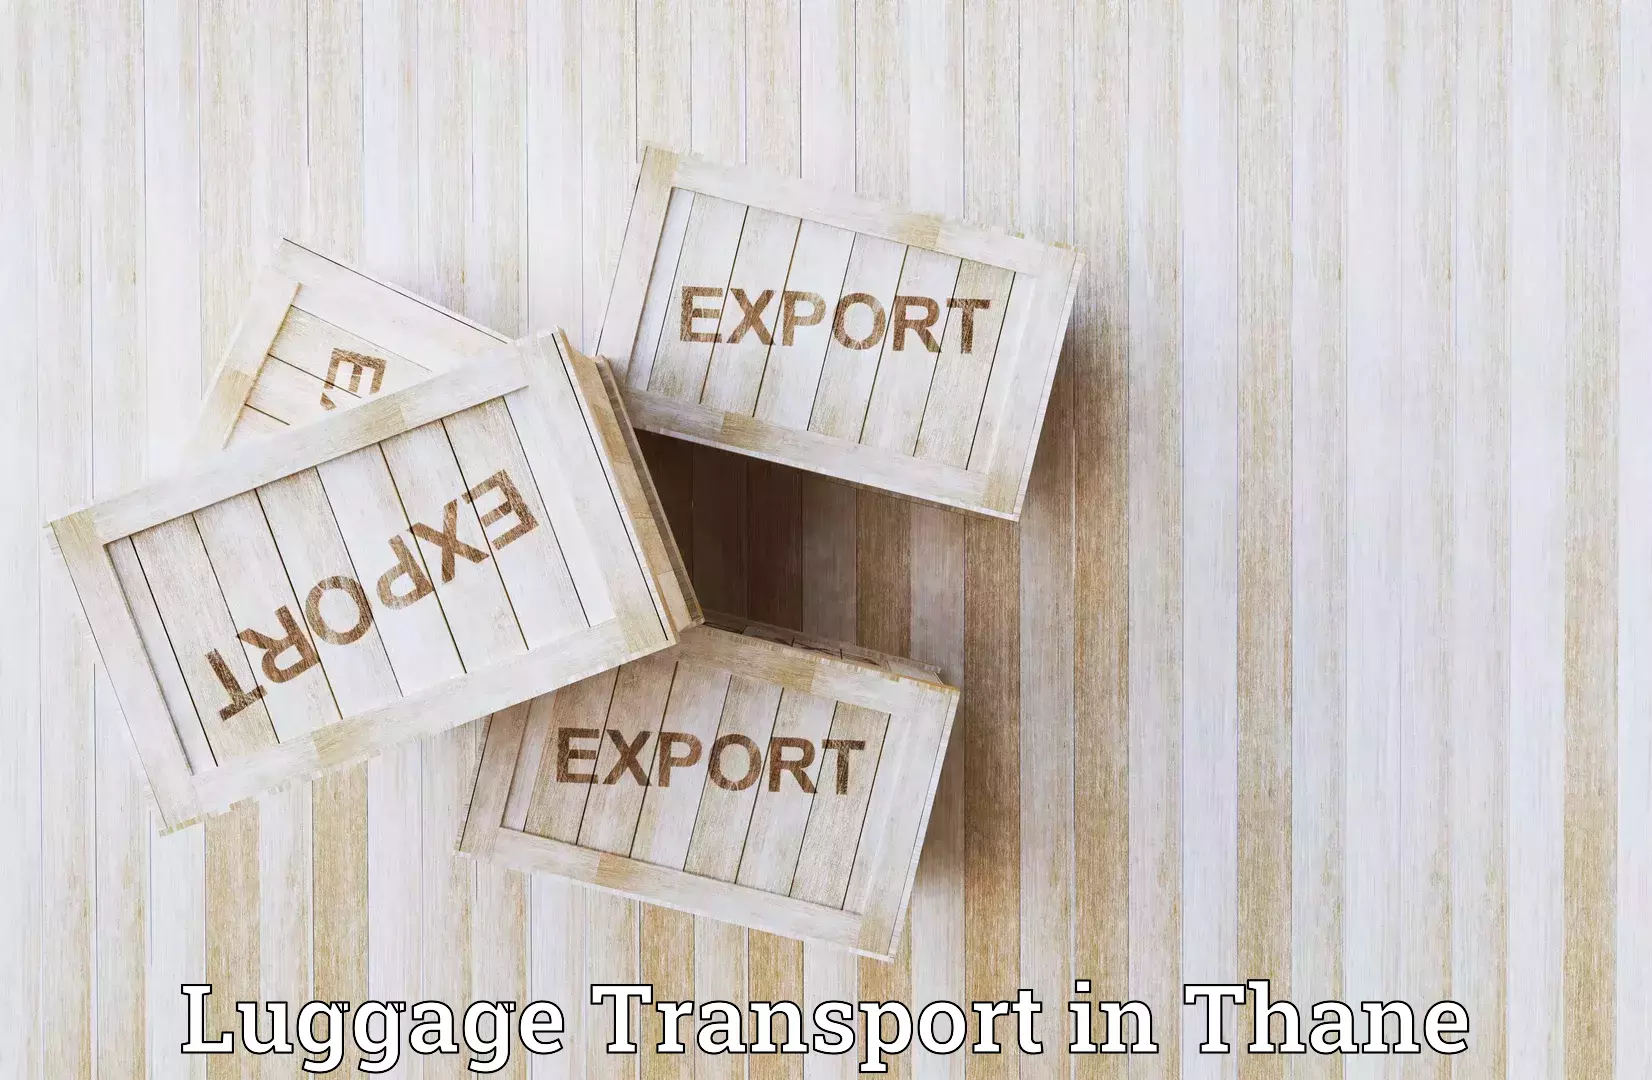 Baggage transport technology in Thane